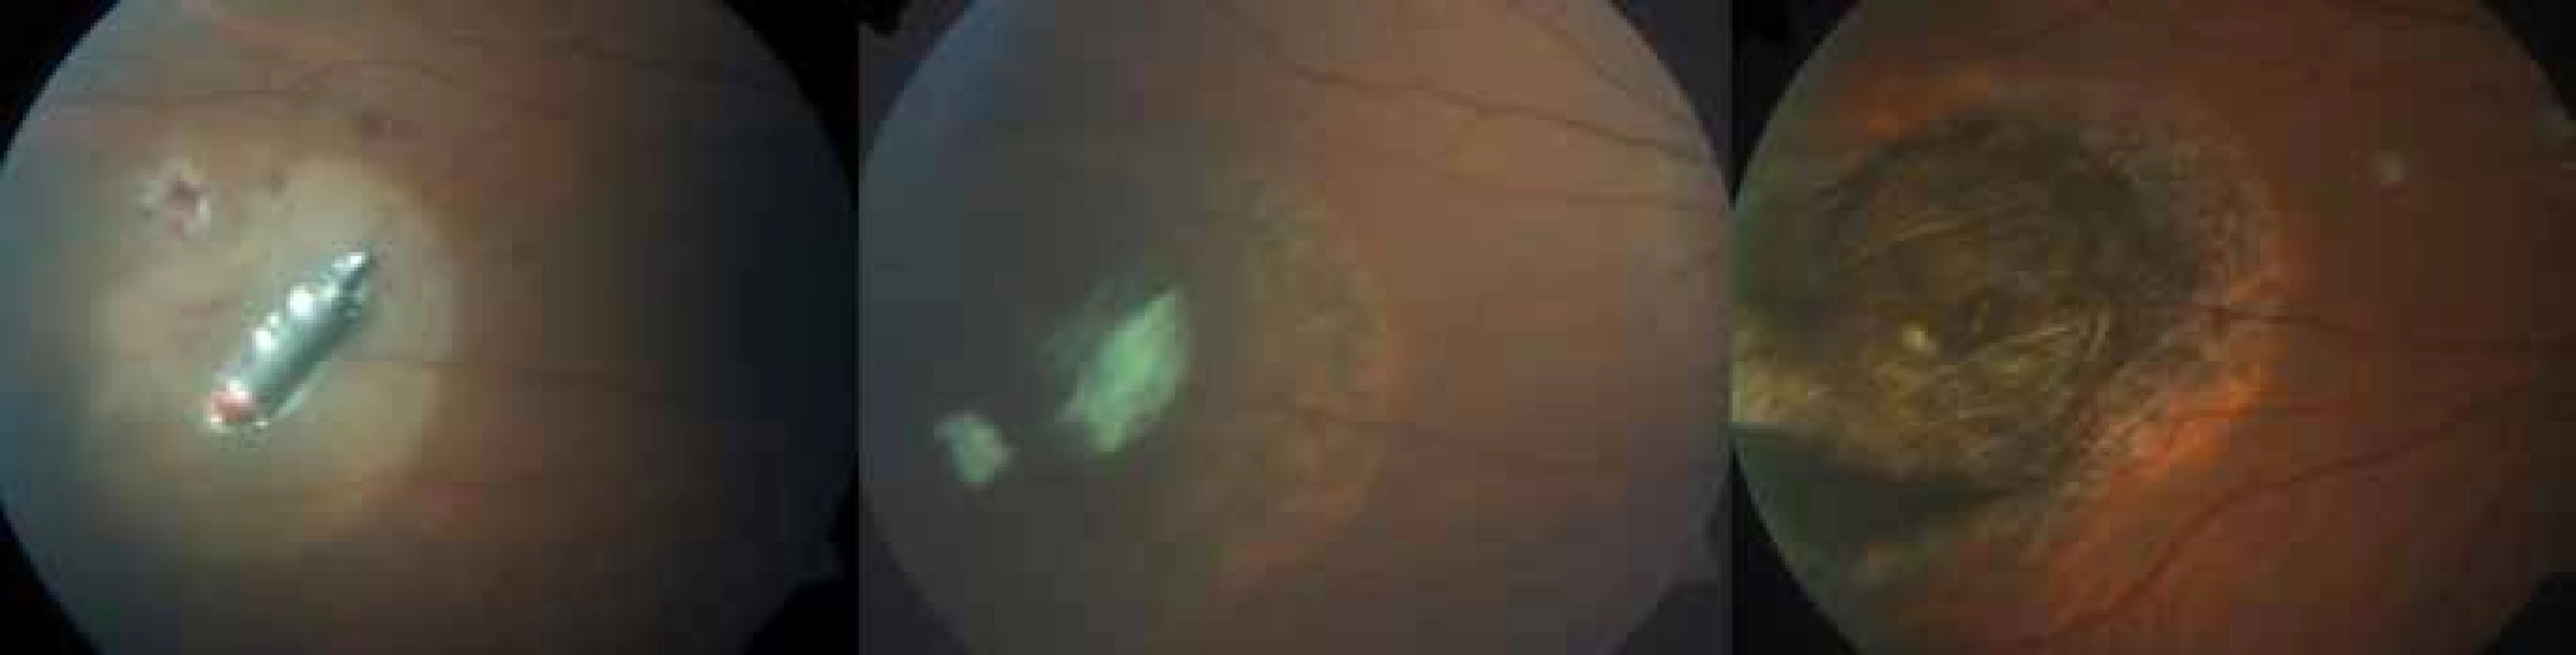 Patient no. 13 – finding before procedure and development of scar after extraction of IOFB and external cryoretinopexy 